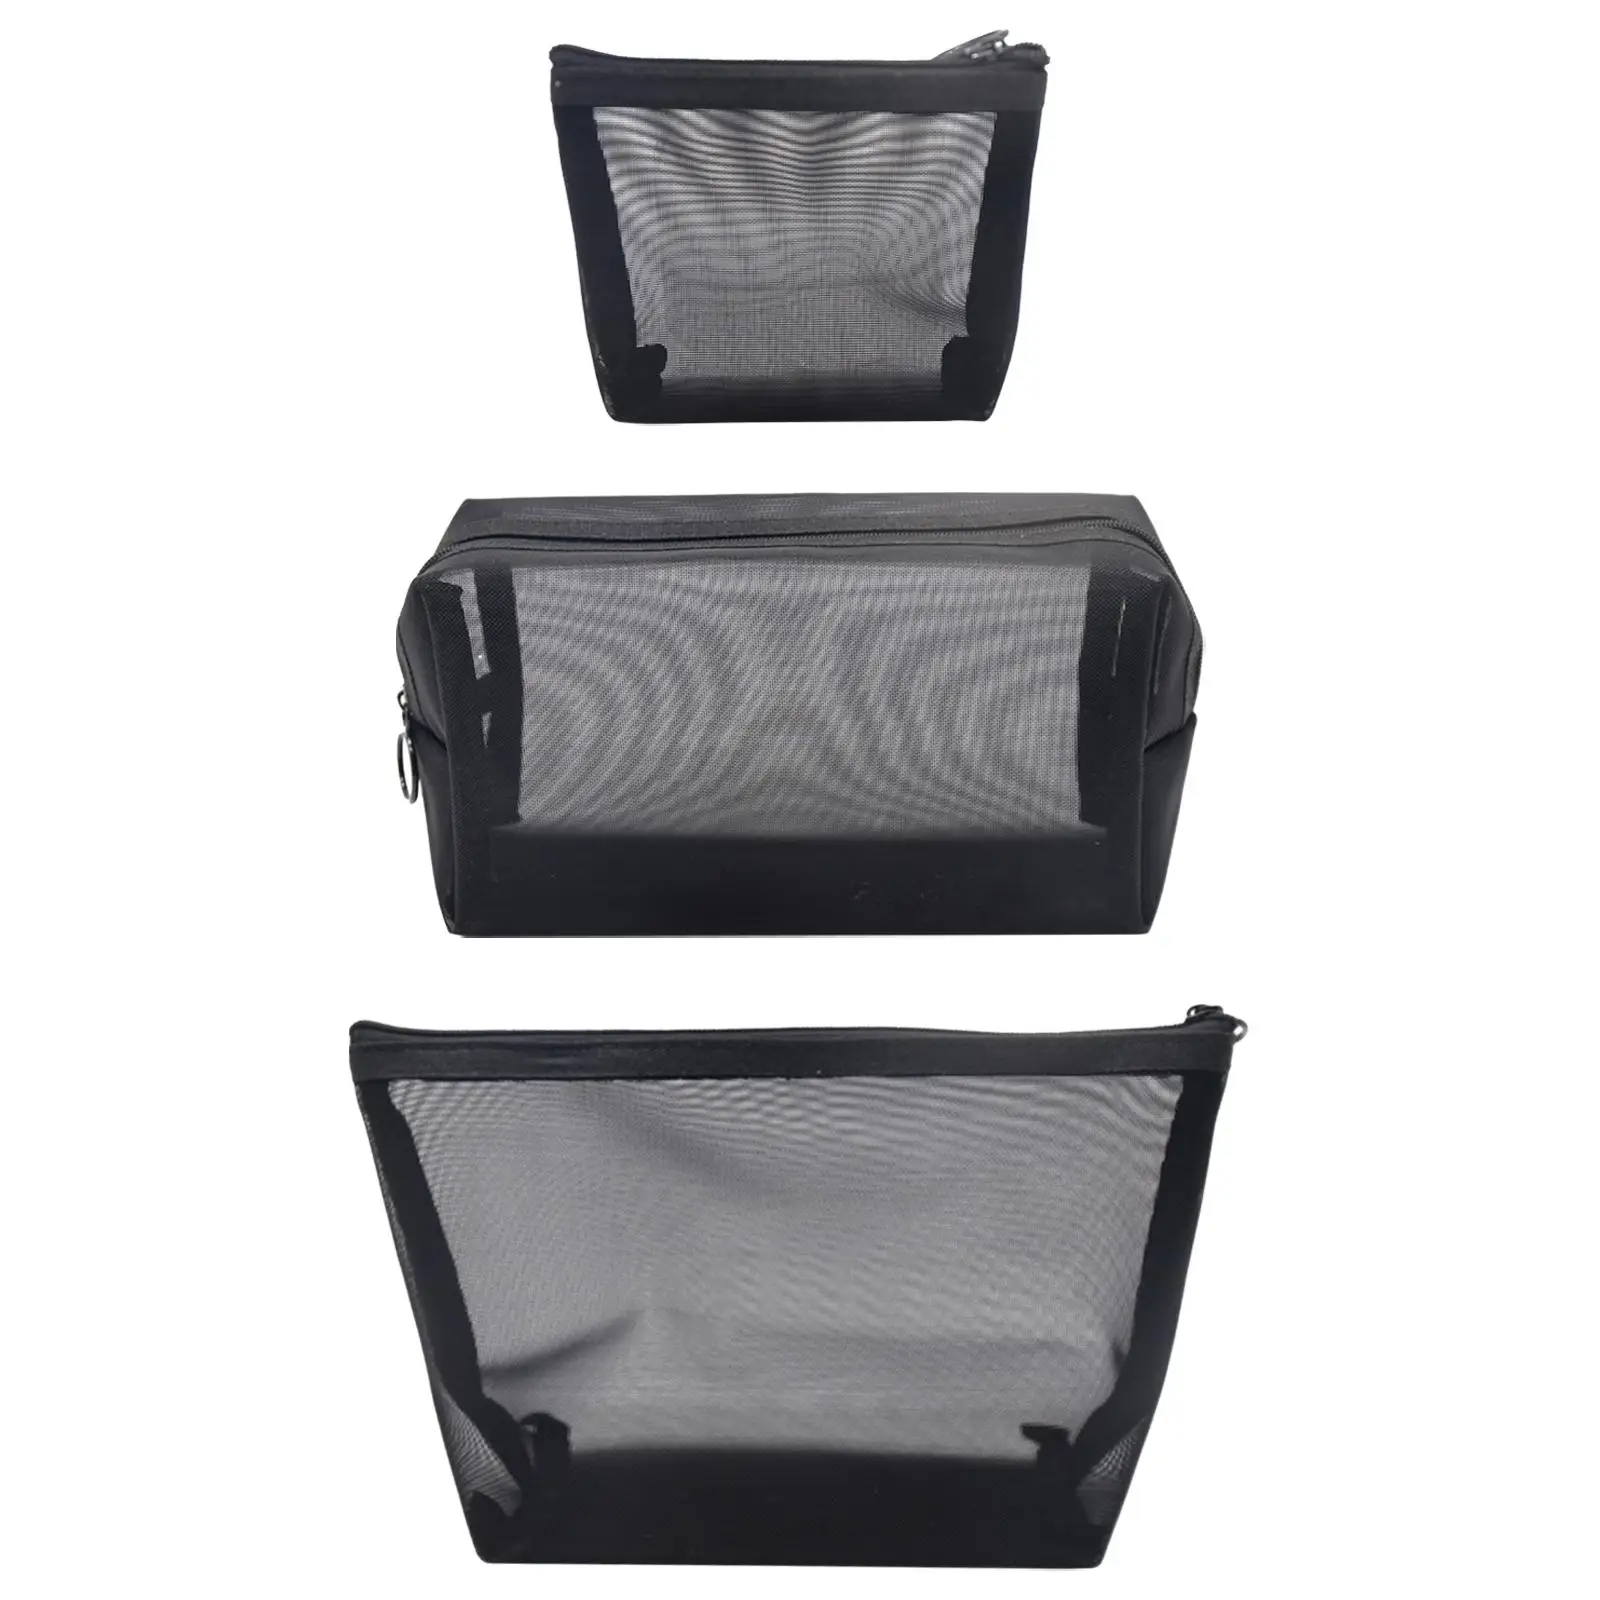 3x Mesh Travel Makeup Bags Portable Zipper Opening Cosmetic Pouch for Traveling Toiletries Hair Accessories Gym Business Trip